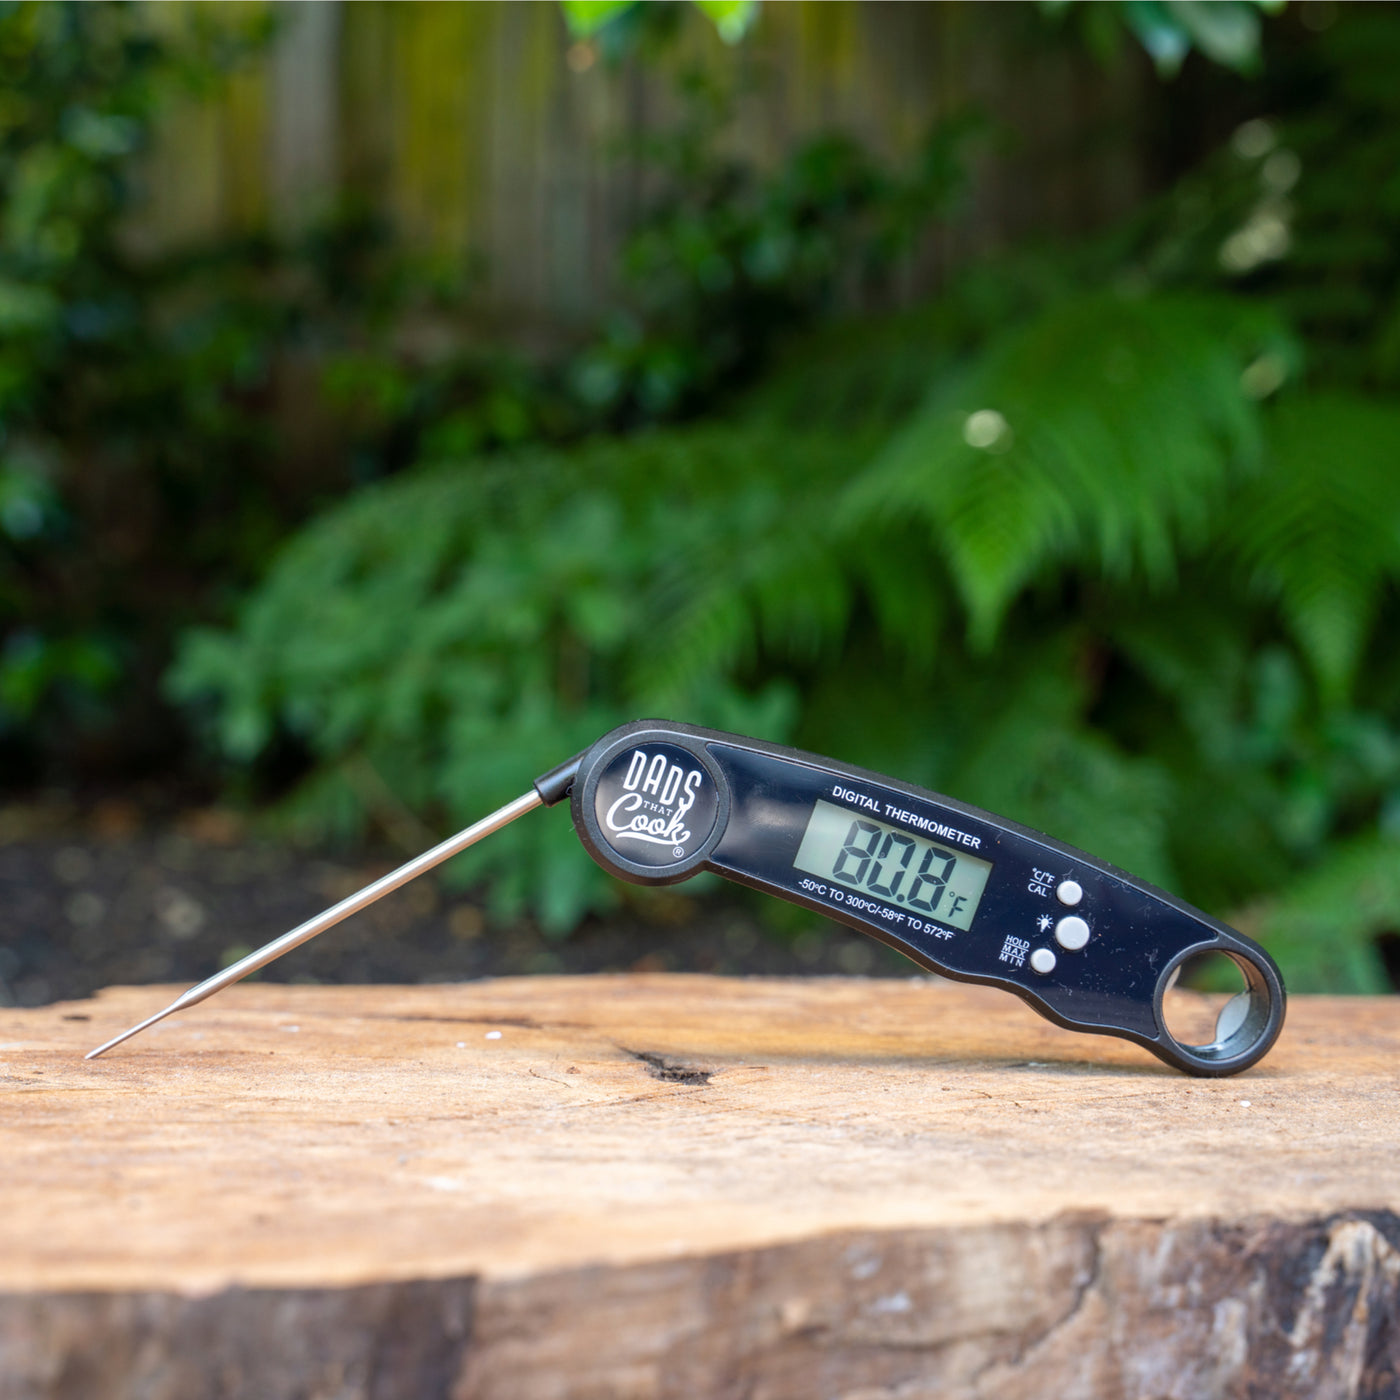 recteq Instant Read Thermometer